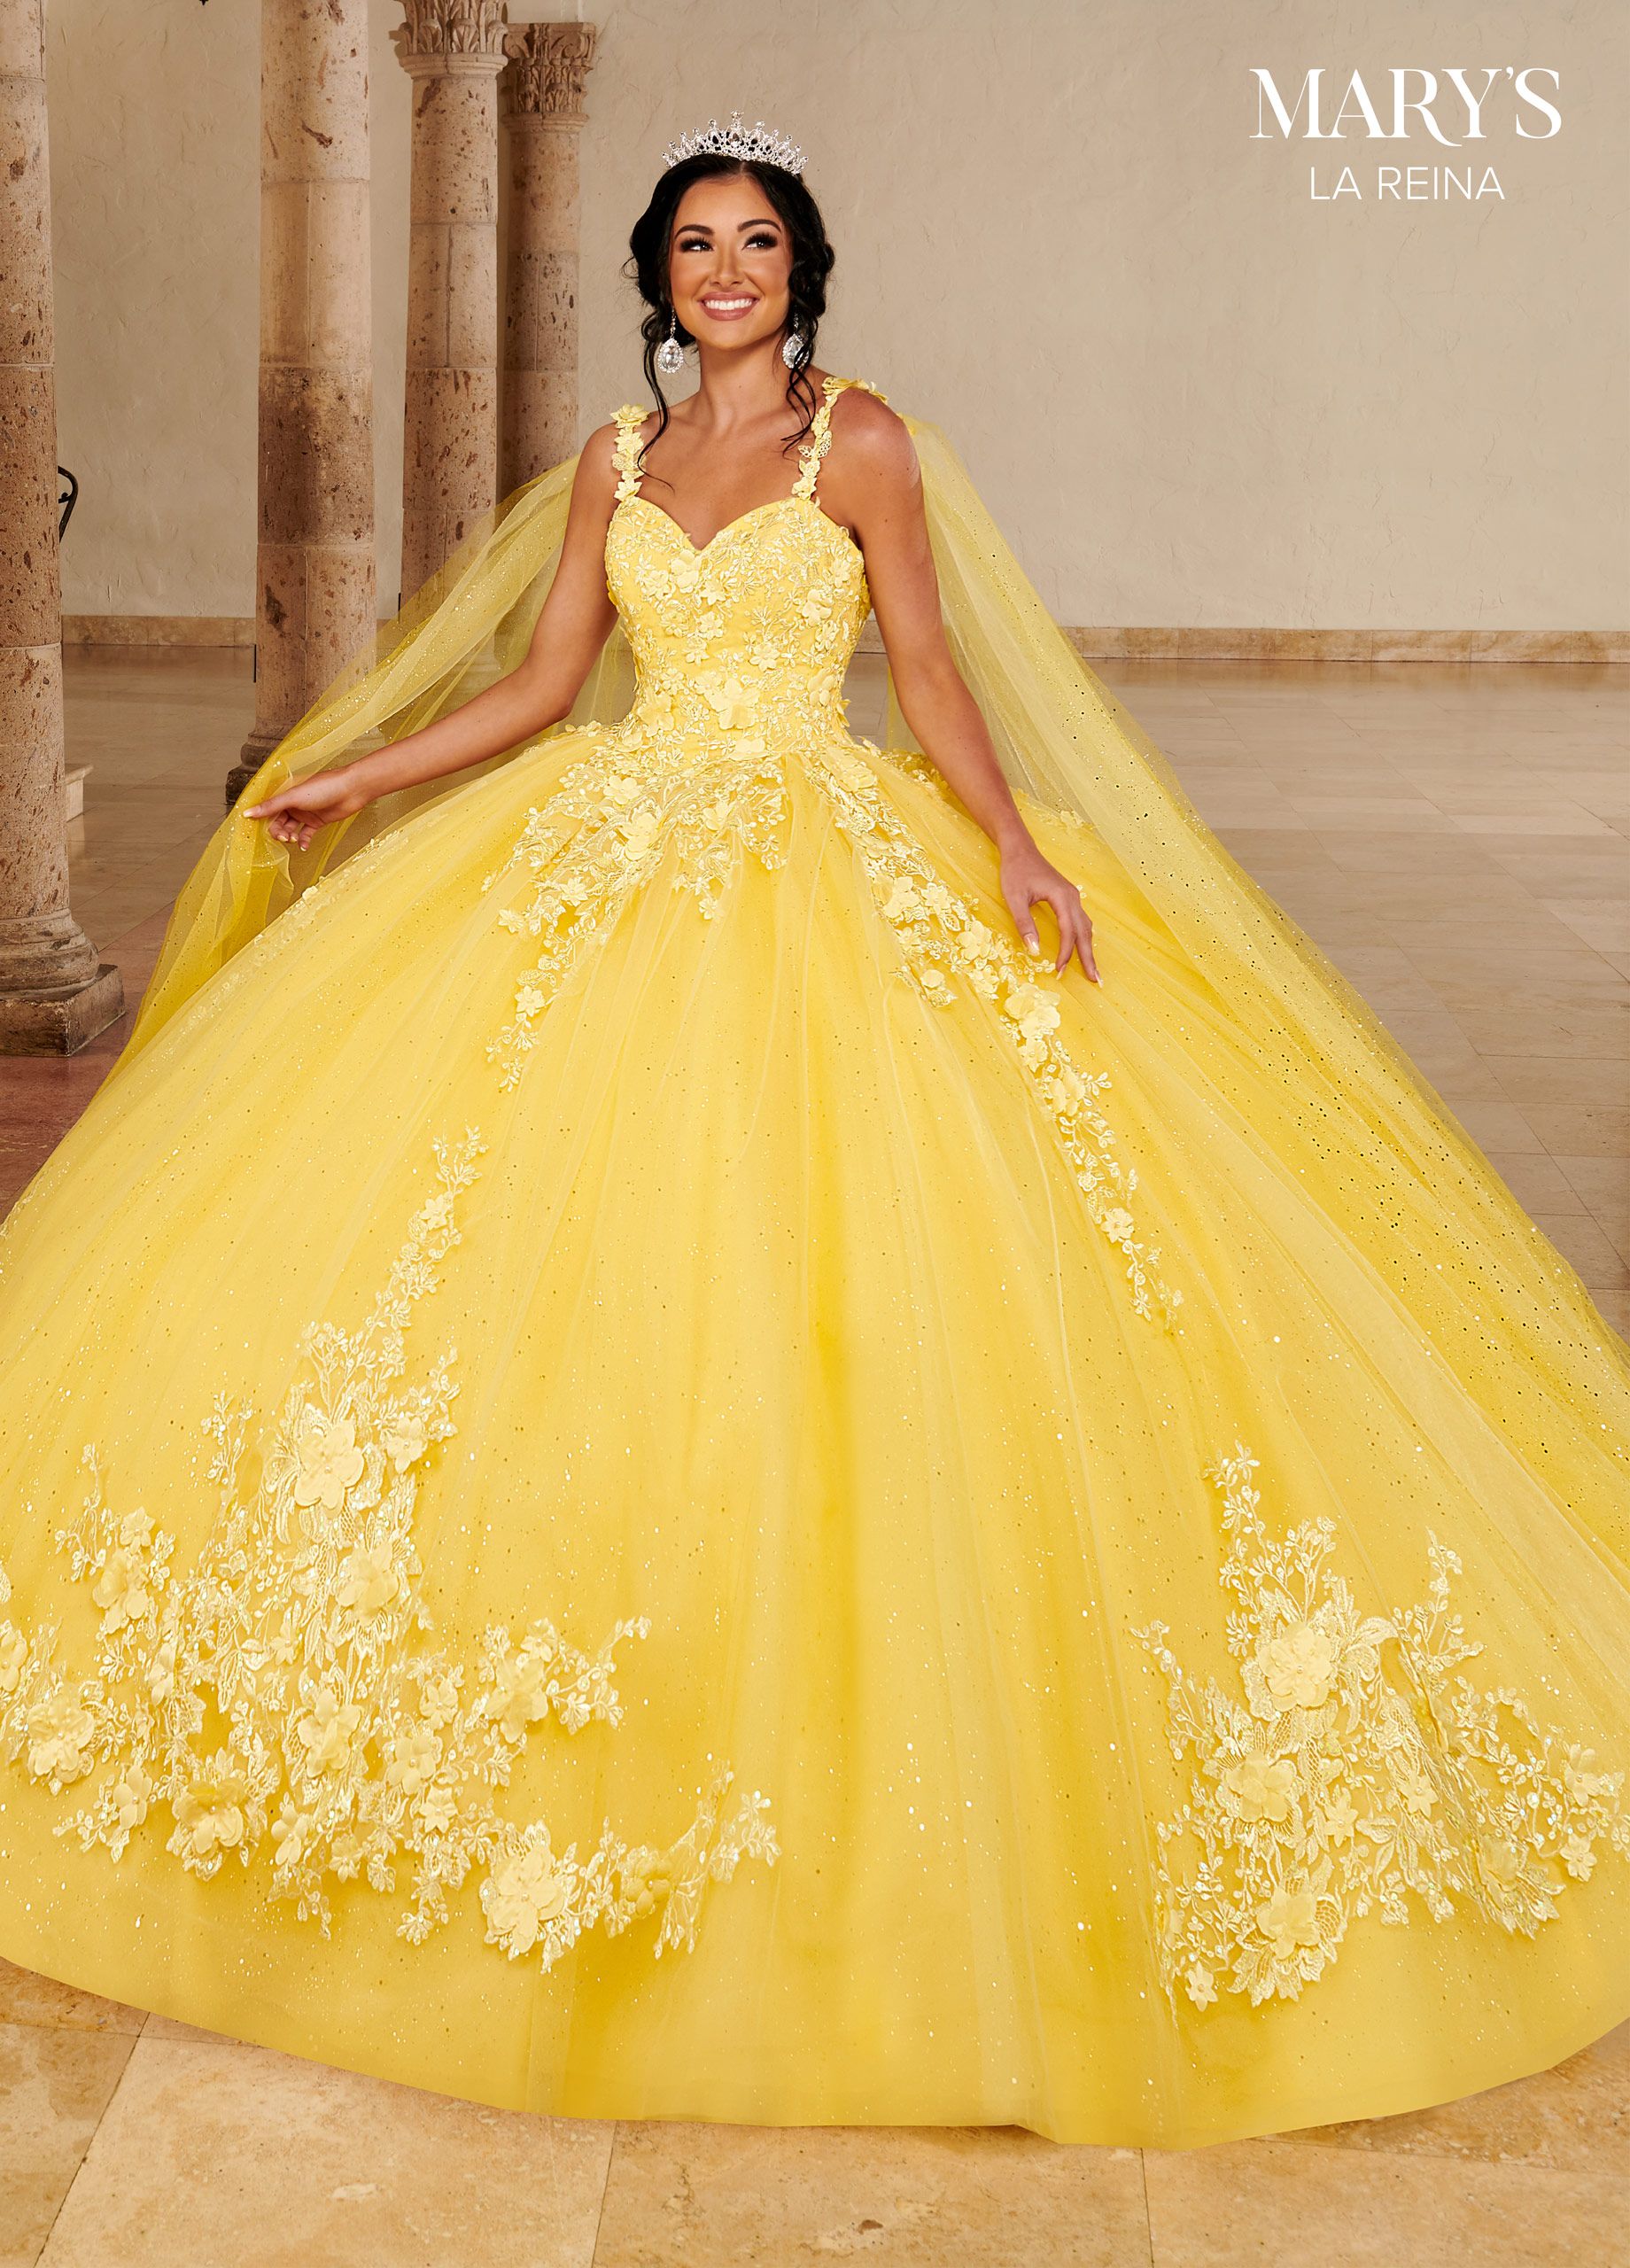 Pearls and Yellow Bridal Dresses – The White Wren